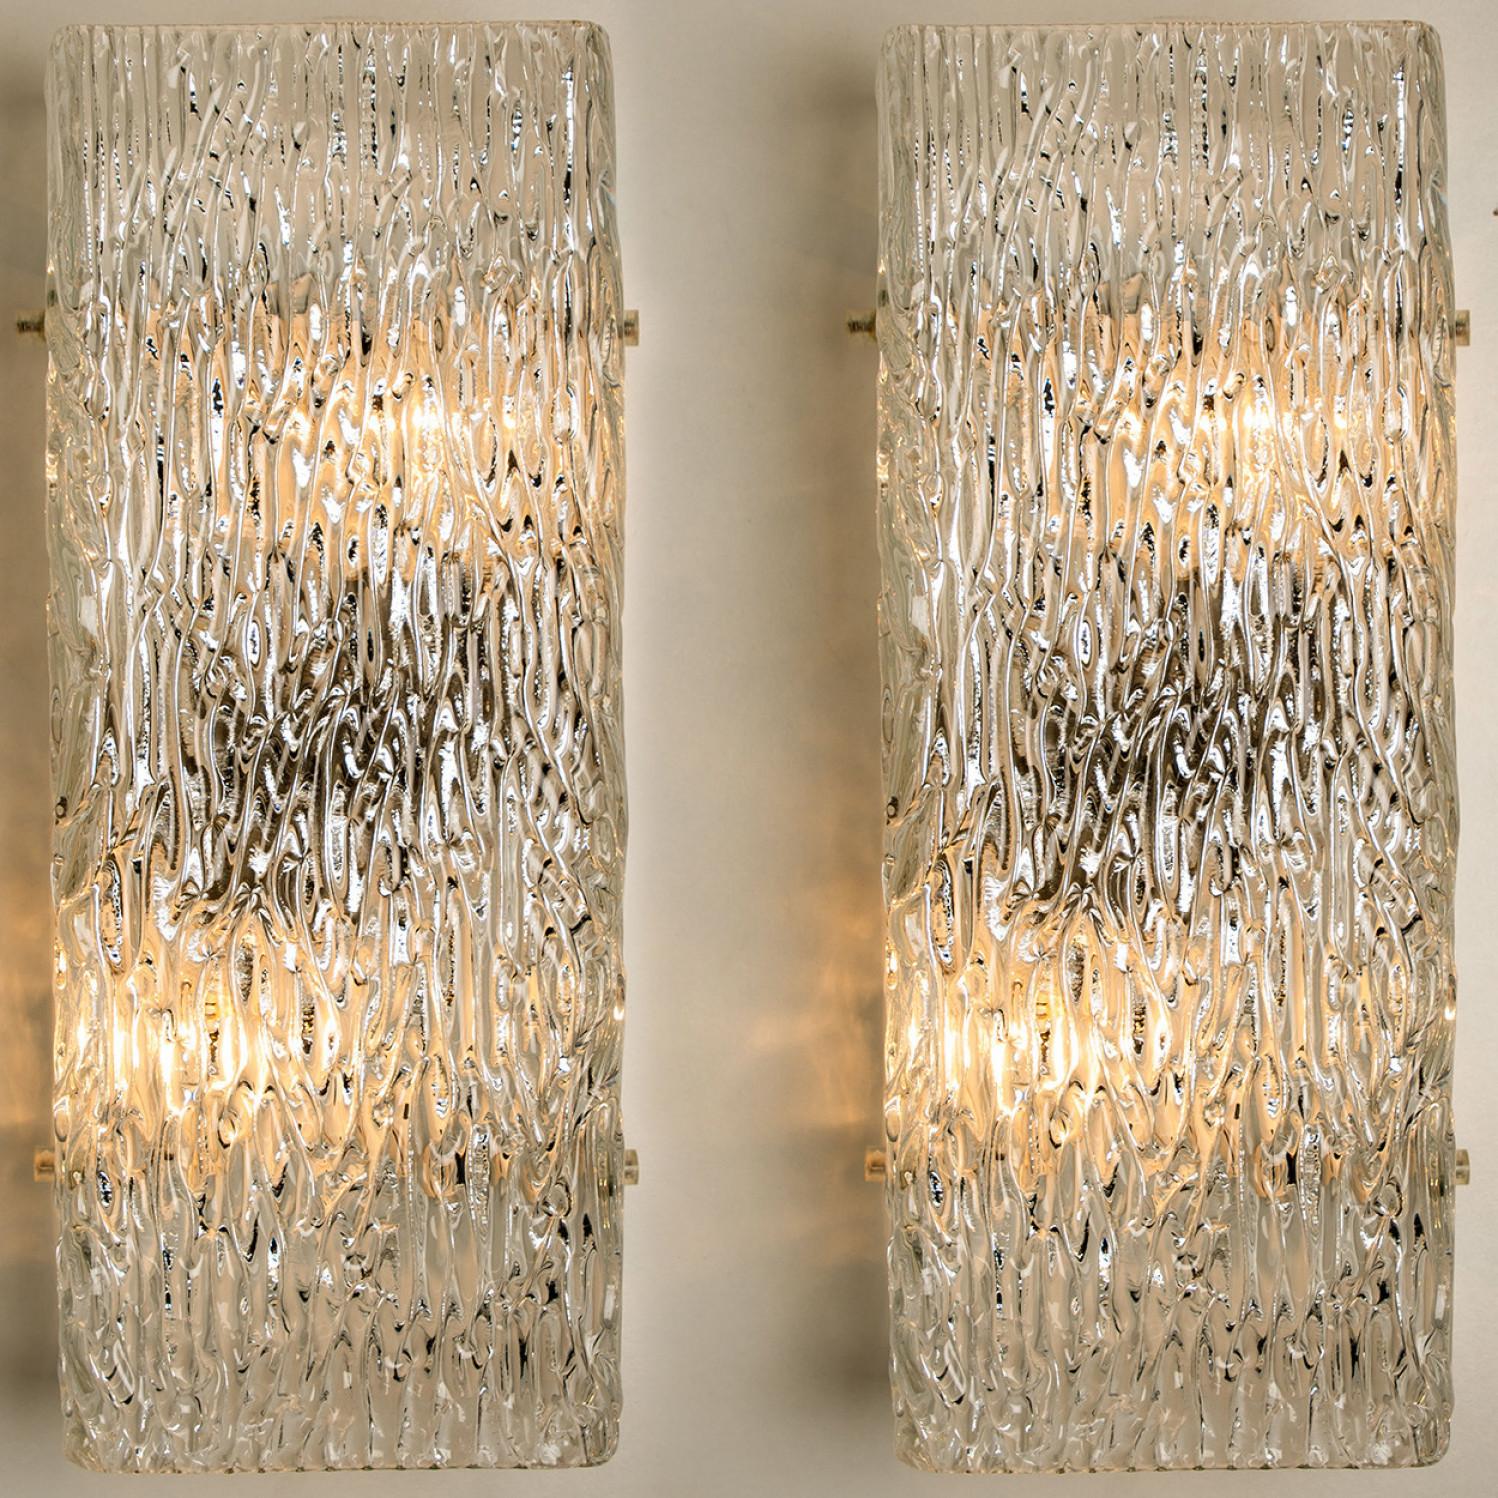 One of the two light fixtures by J.T. Kalmar, Vienna, Austria, manufactured in circa 1960. The glass shows a beautiful wave texture, which gives a diffuse light effect and a nice pattern on ceiling, walls and floor.
The stylish elegance of this lamp